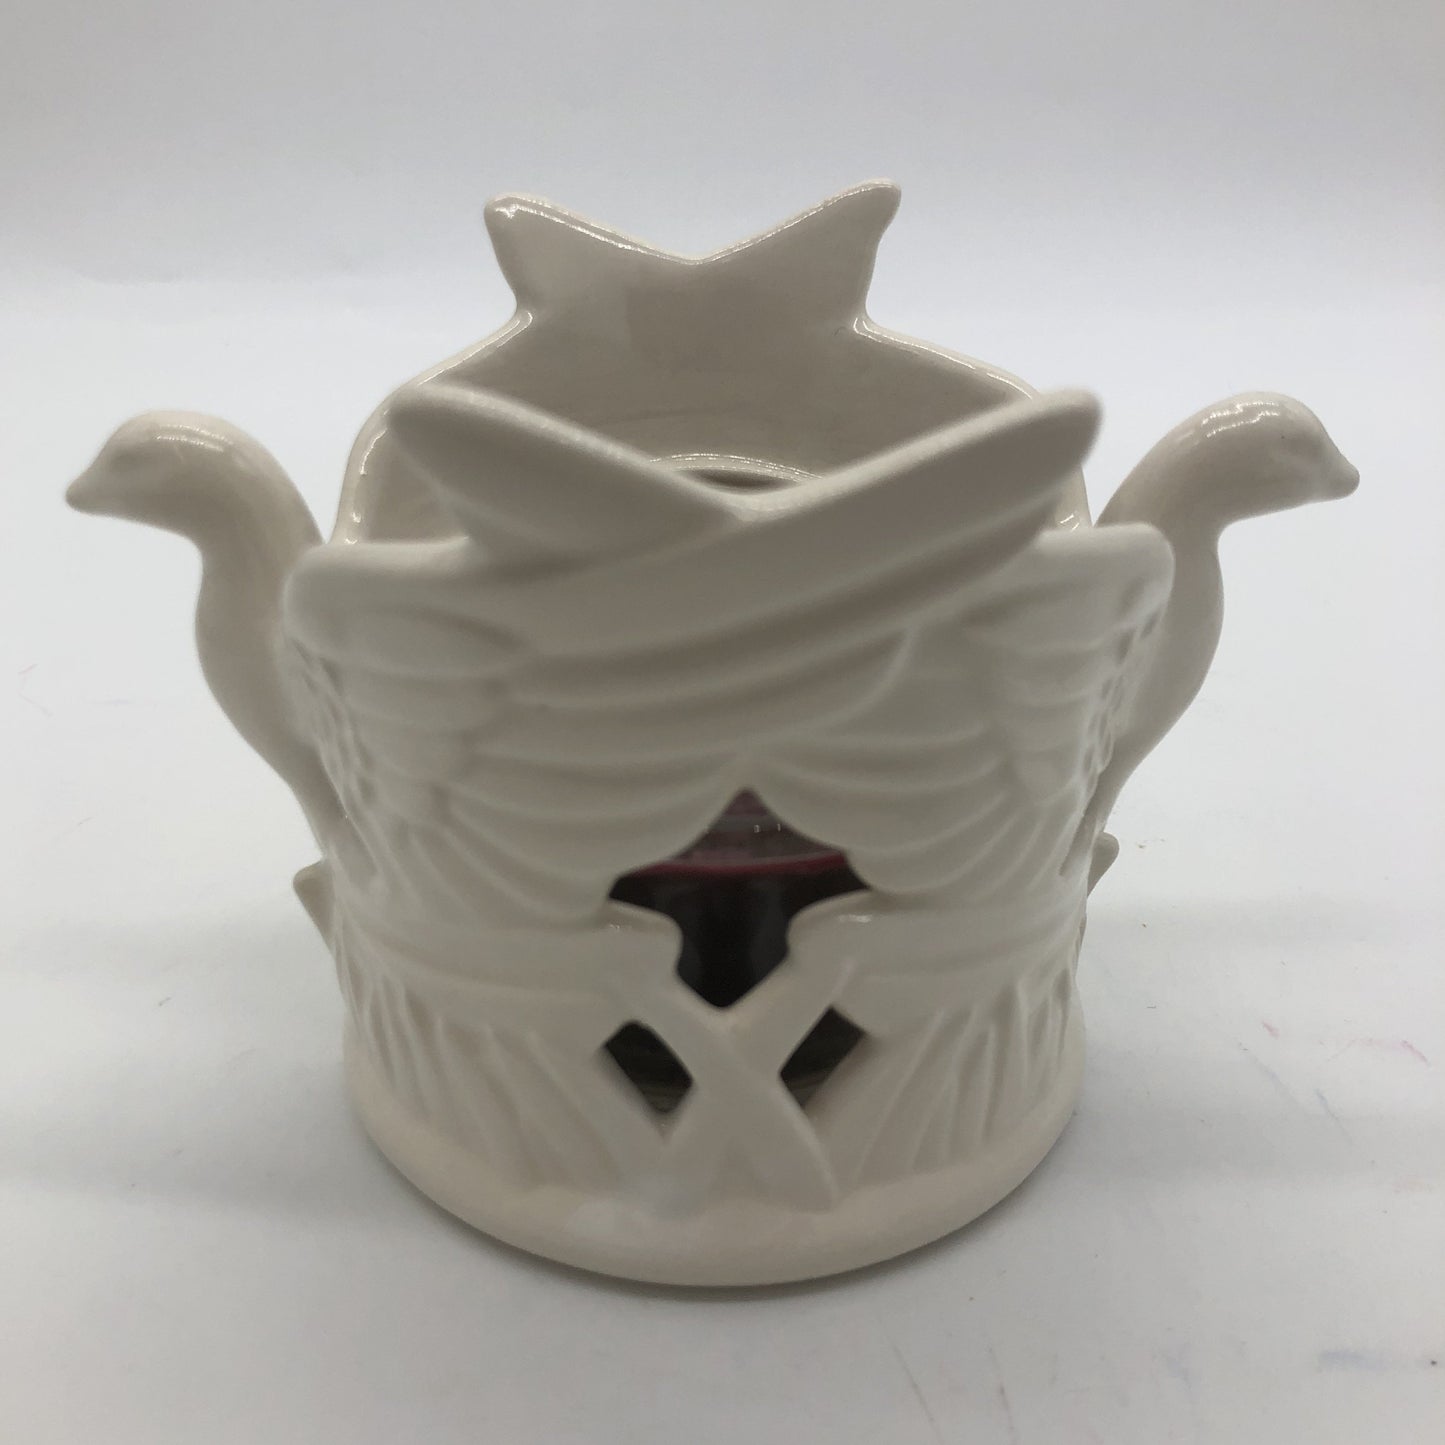 Ceramic votive holder made of two doves in white and small votive candle inside.